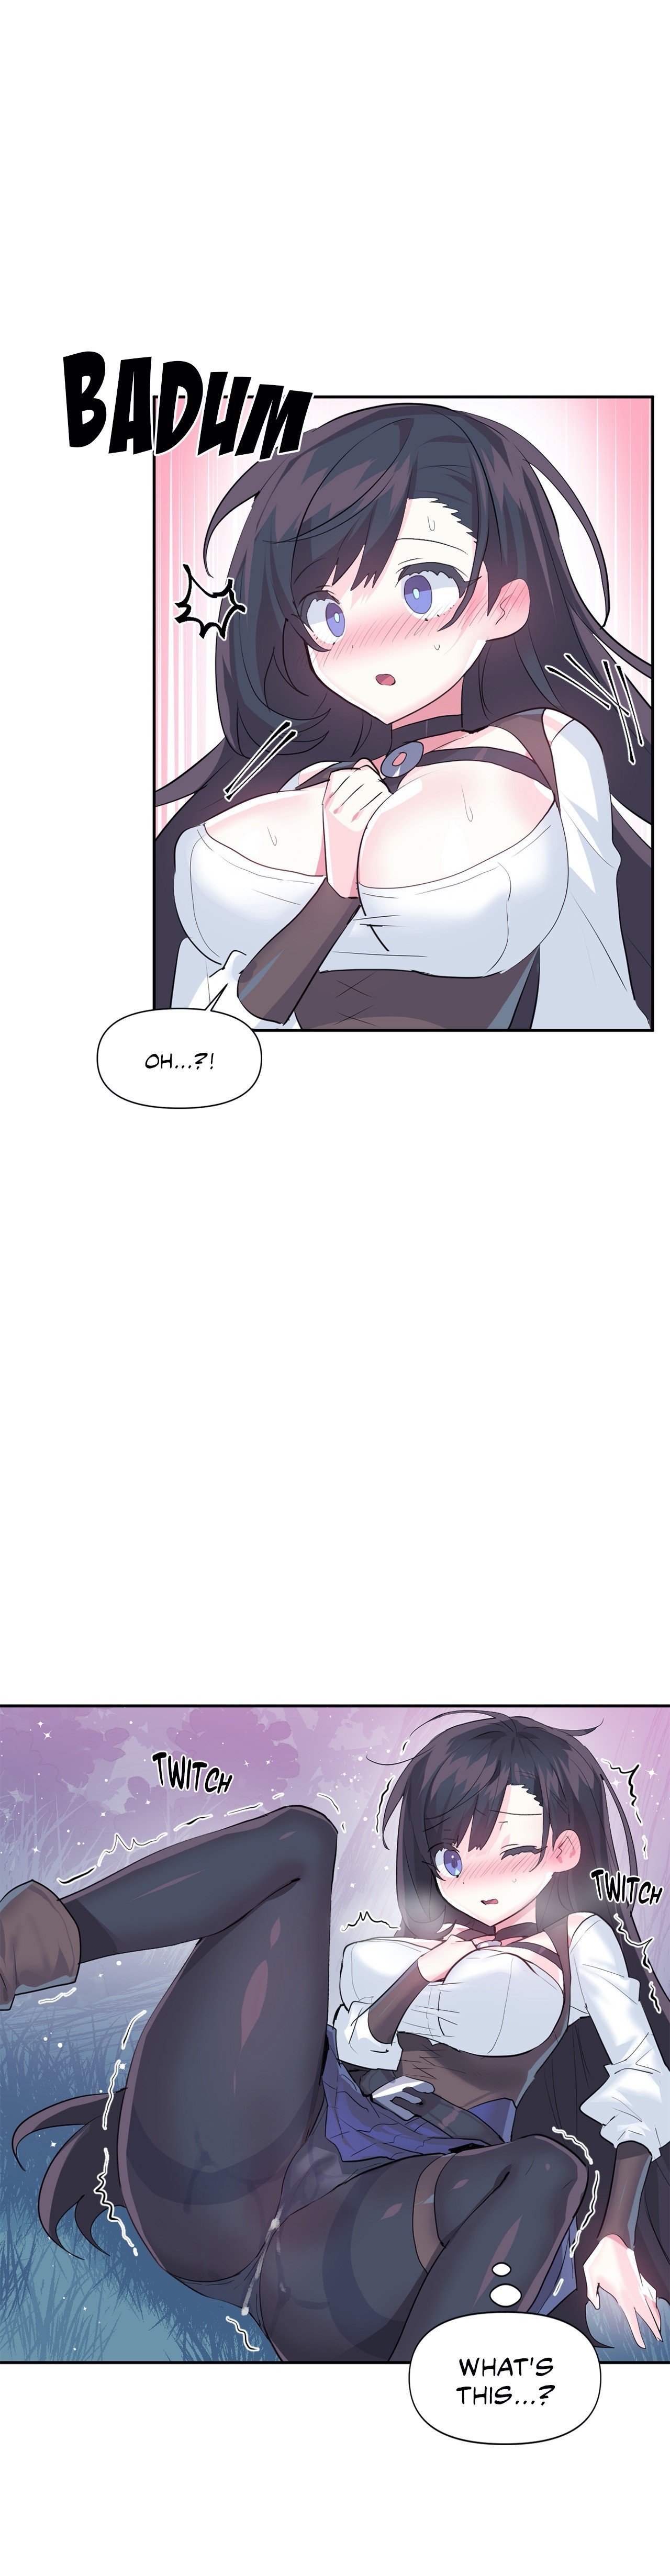 log-in-to-lust-a-land-chap-34-20